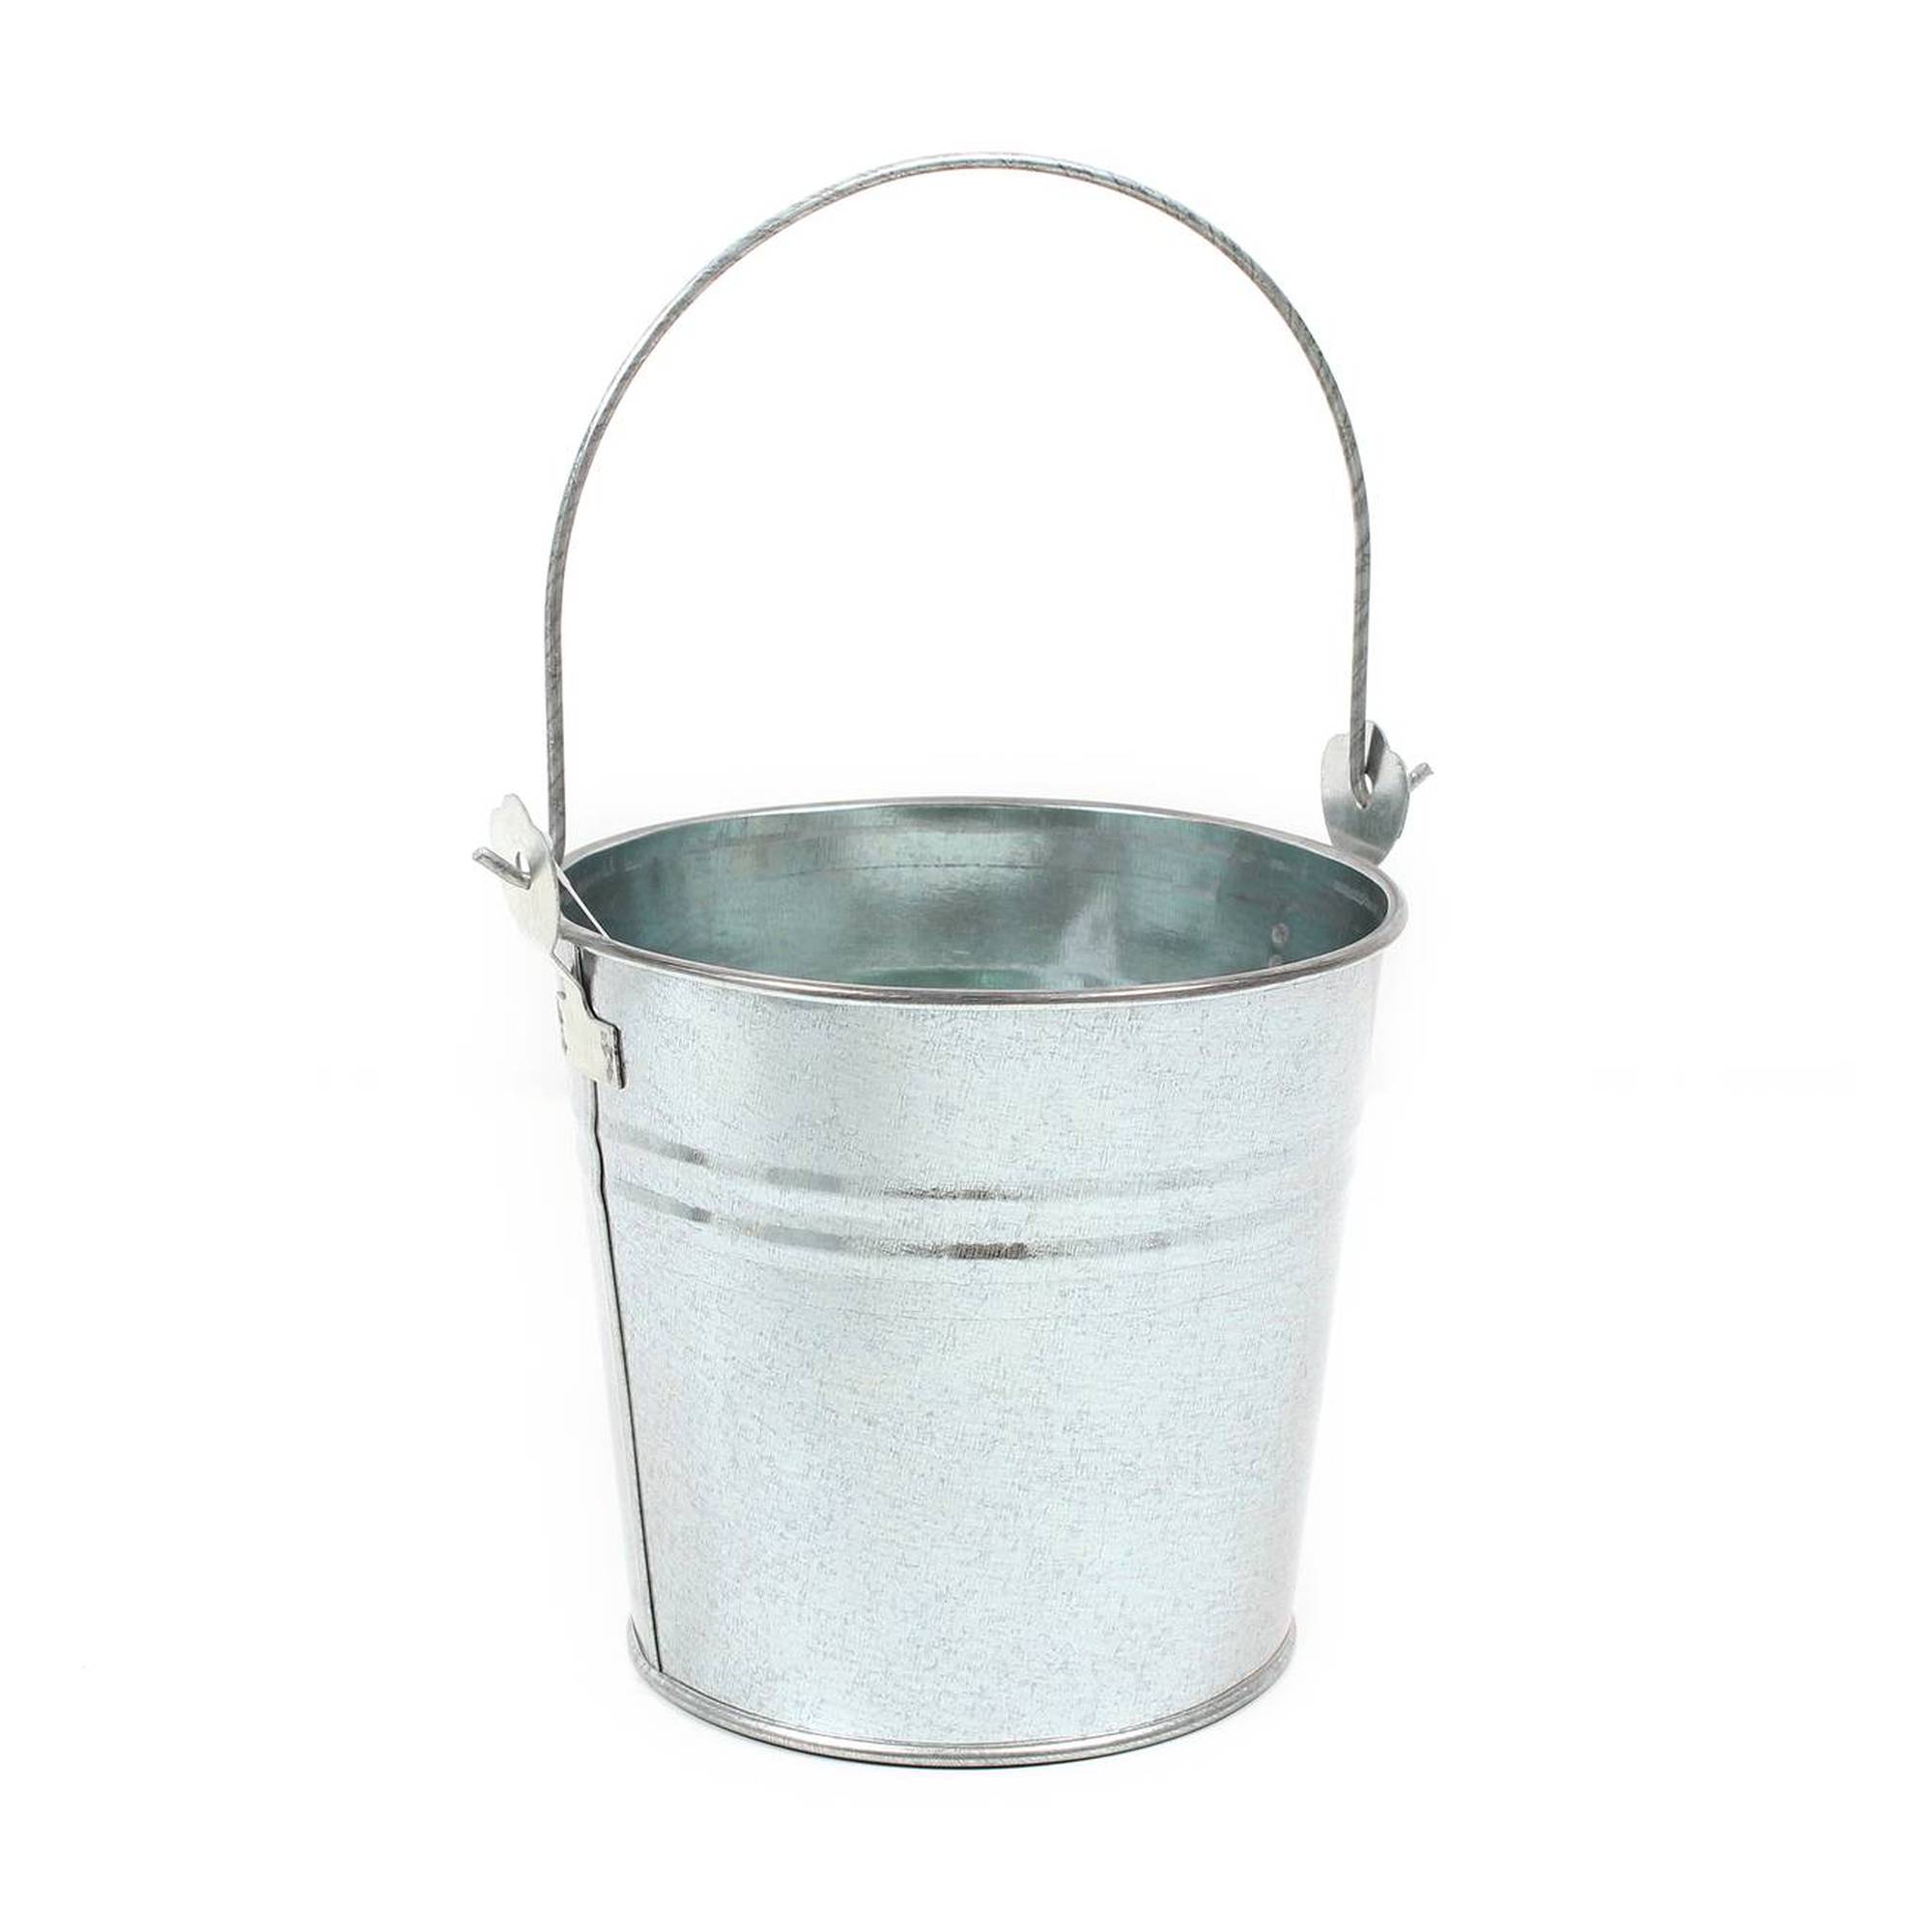 Decorate Your Own Small Metal Bucket 14 x 11 x 13 cm